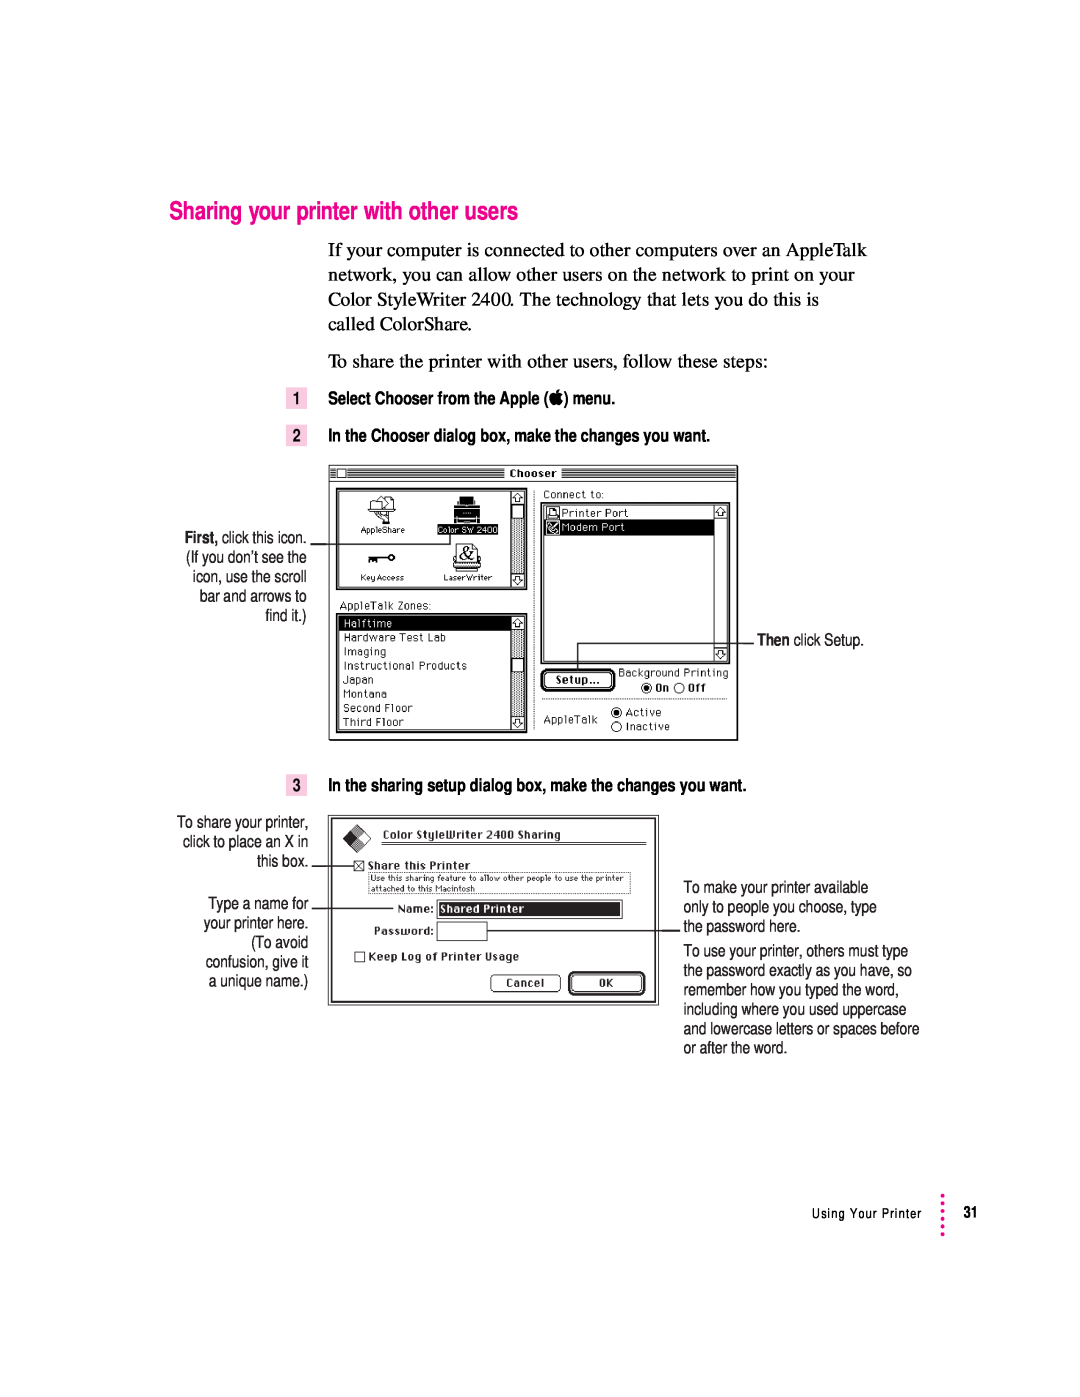 Apple 2400 manual Sharing your printer with other users, Select Chooser from the Apple K menu, Then click Setup 